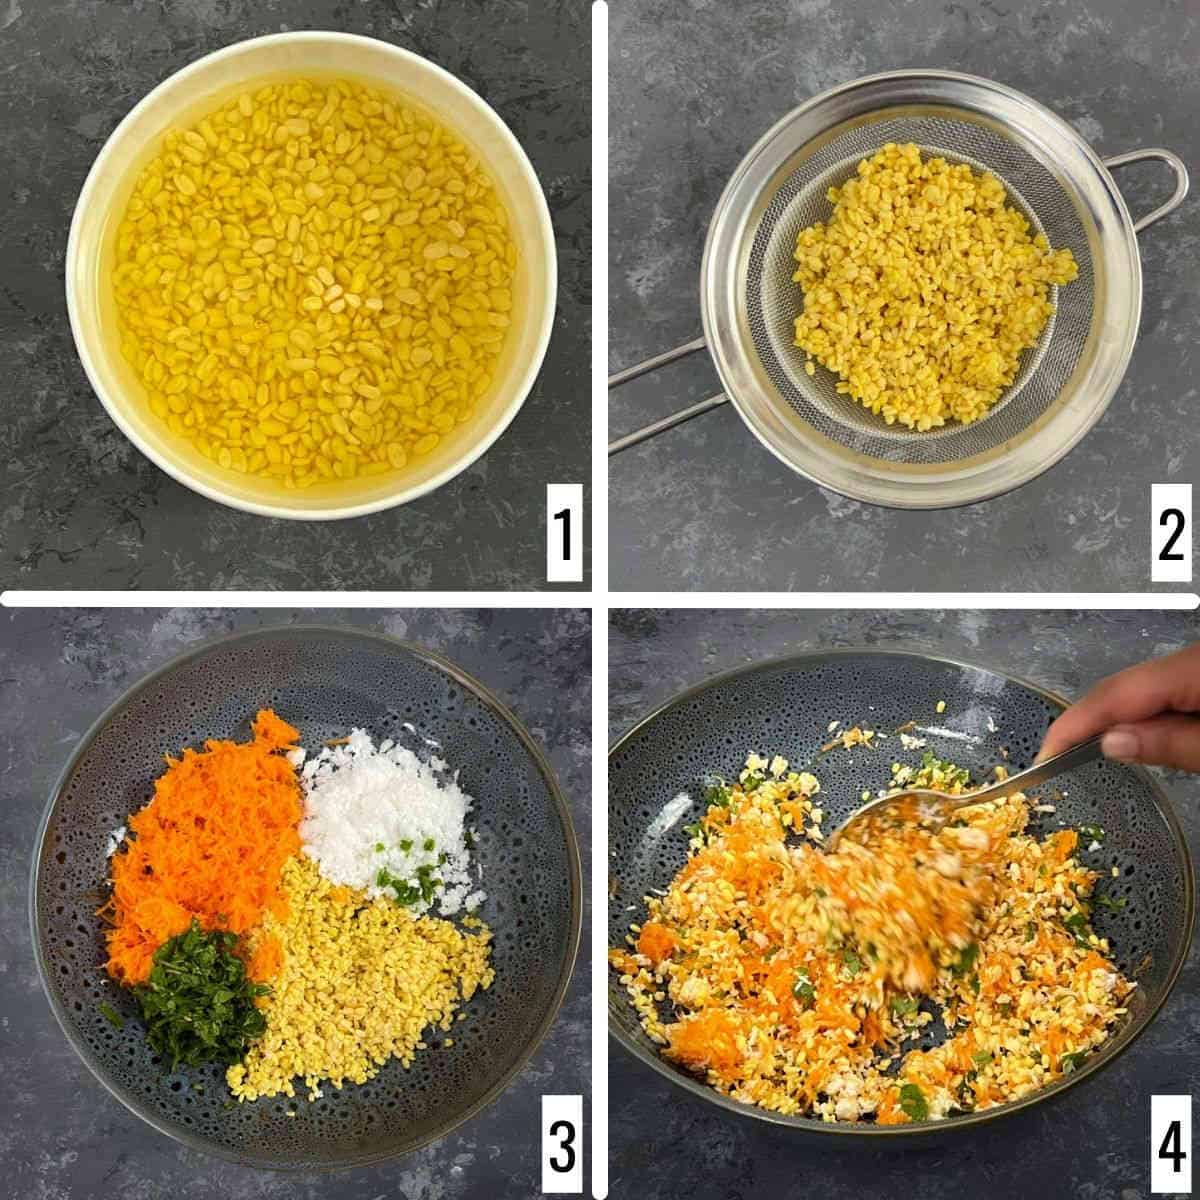 A 4-step collage showing the soaking and draining of moong dal along with mixing the salad ingredients.